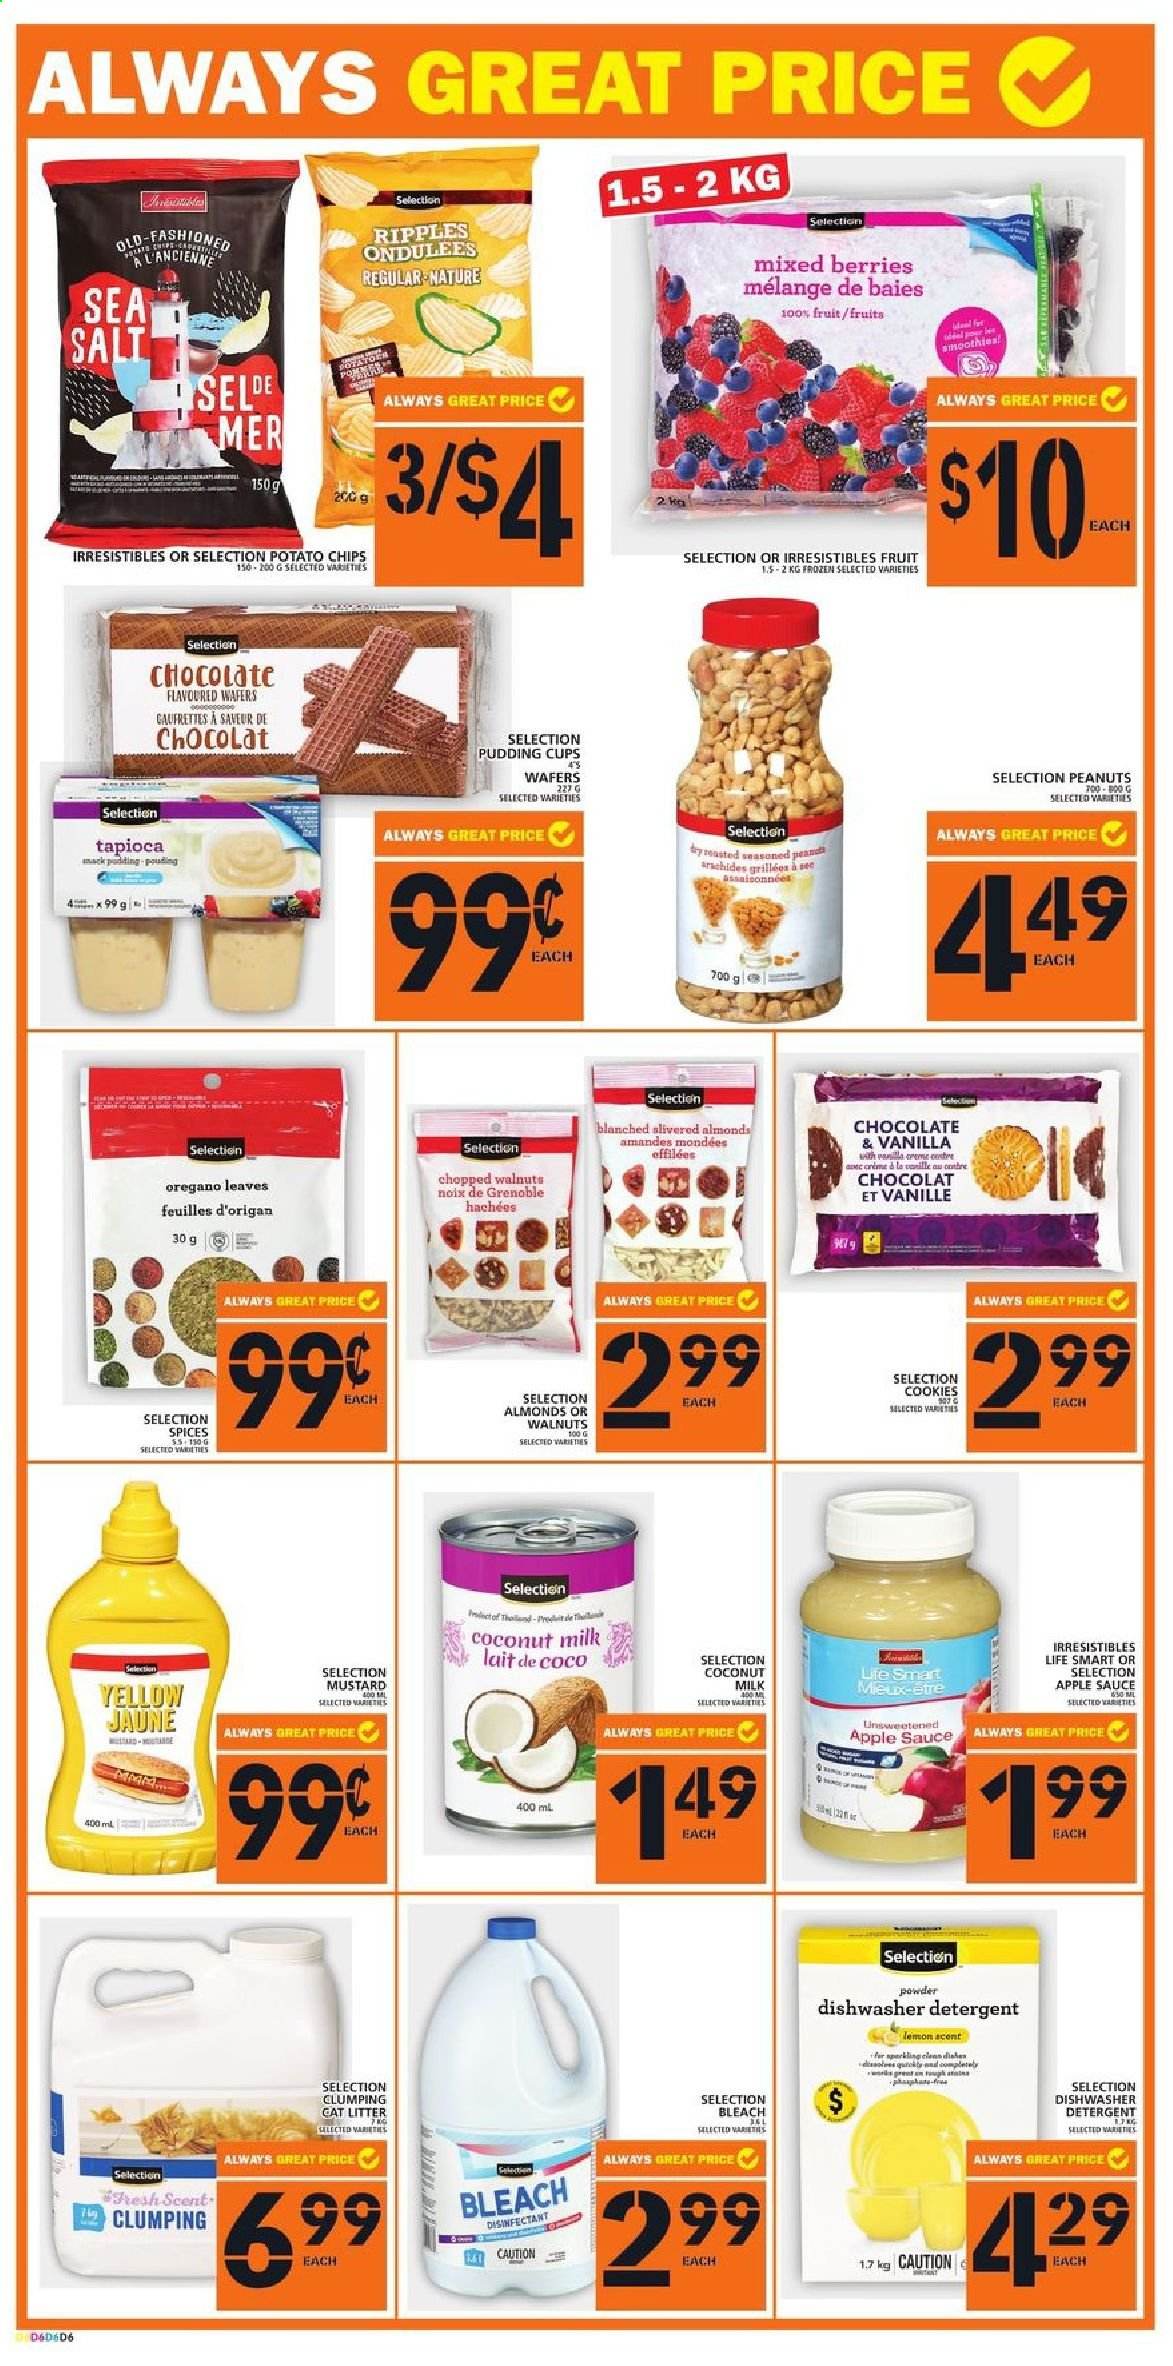 thumbnail - Food Basics Flyer - February 25, 2021 - March 03, 2021 - Sales products - sauce, pudding, cookies, wafers, potato chips, coconut milk, mustard, apple sauce, almonds, walnuts, peanuts, bleach, Rin, cup, cat litter, desinfection. Page 6.